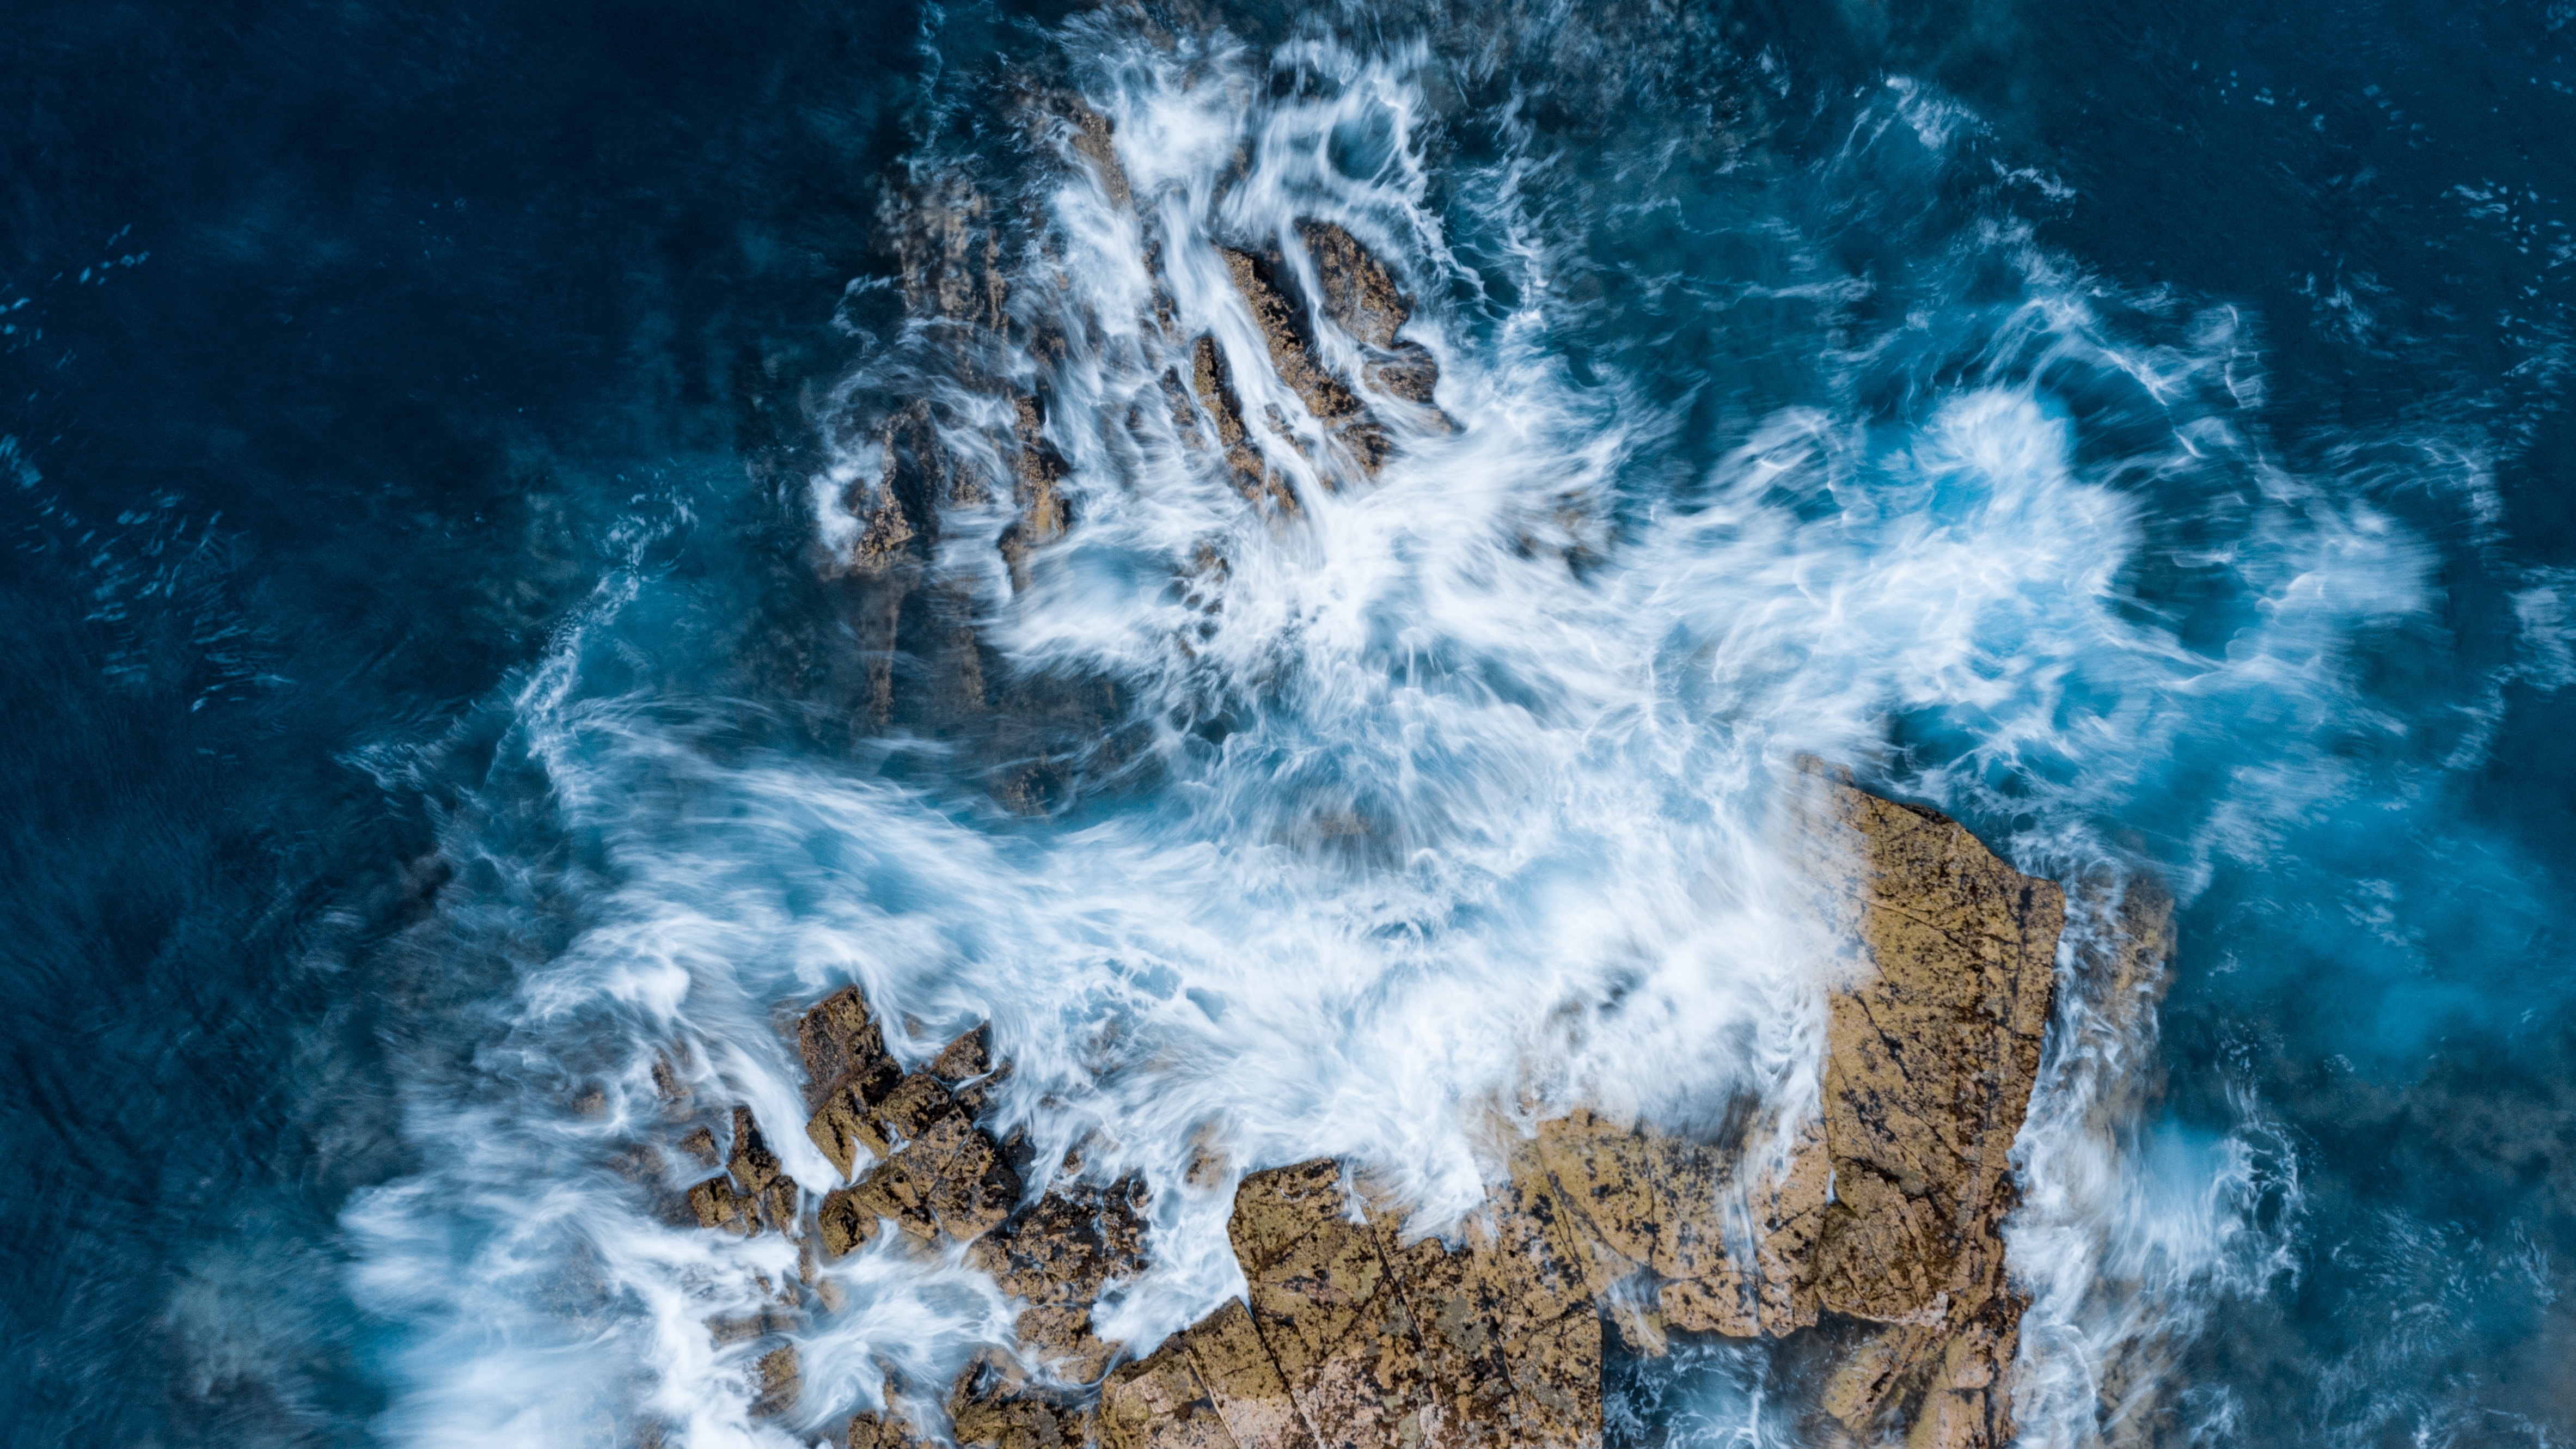 PC Wallpapers nature, water, waves, sea, rocks, view from above